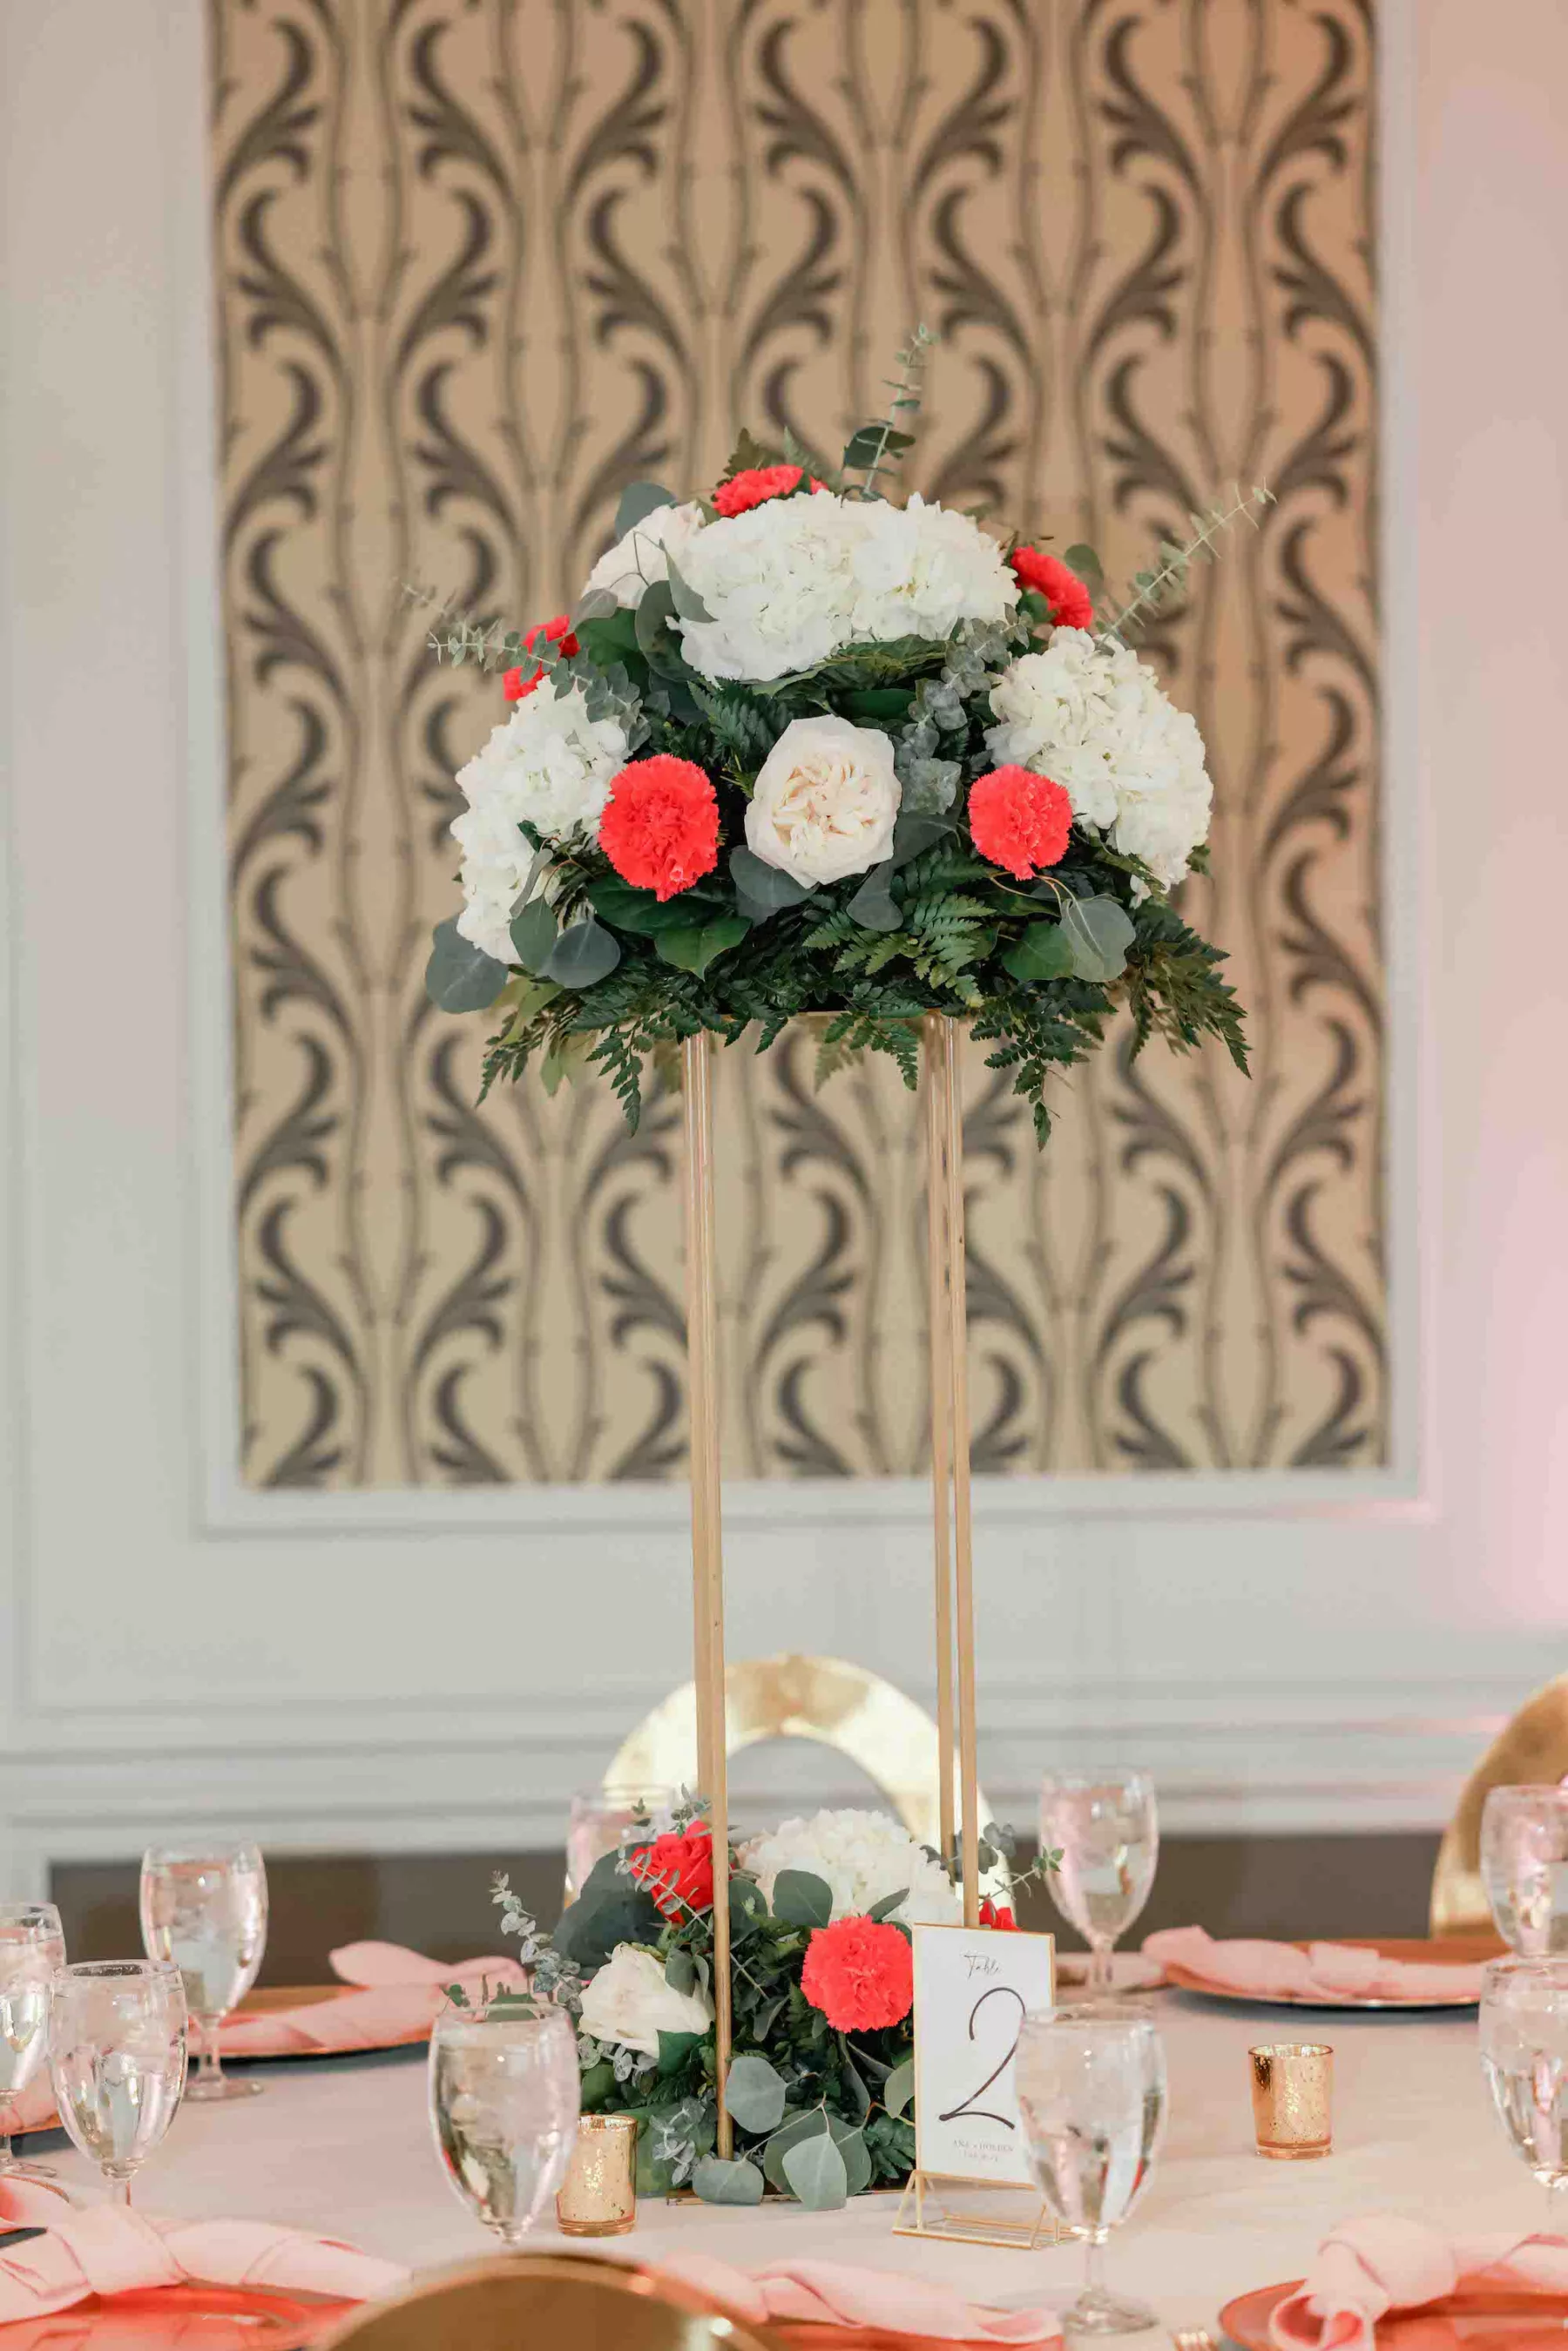 Tall Gold Flower Stand with White Hydrangeas, Pink Roses, and Greenery Fall Wedding Reception Centerpiece Decor Ideas